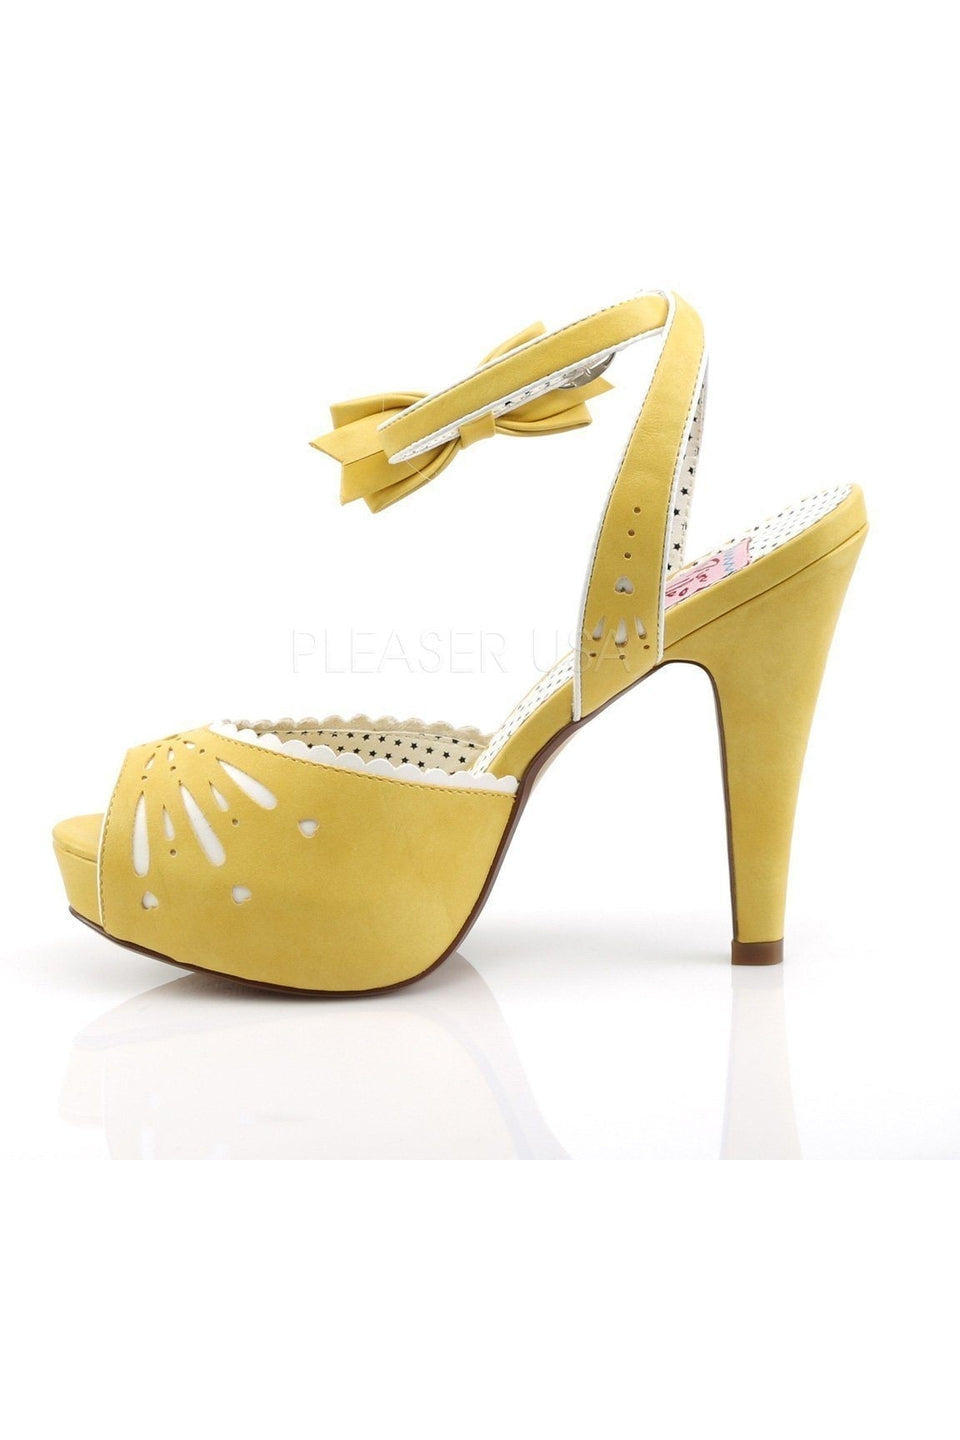 BETTIE-01 Sandal | Yellow Faux Leather-Pin Up Couture-Sandals-SEXYSHOES.COM